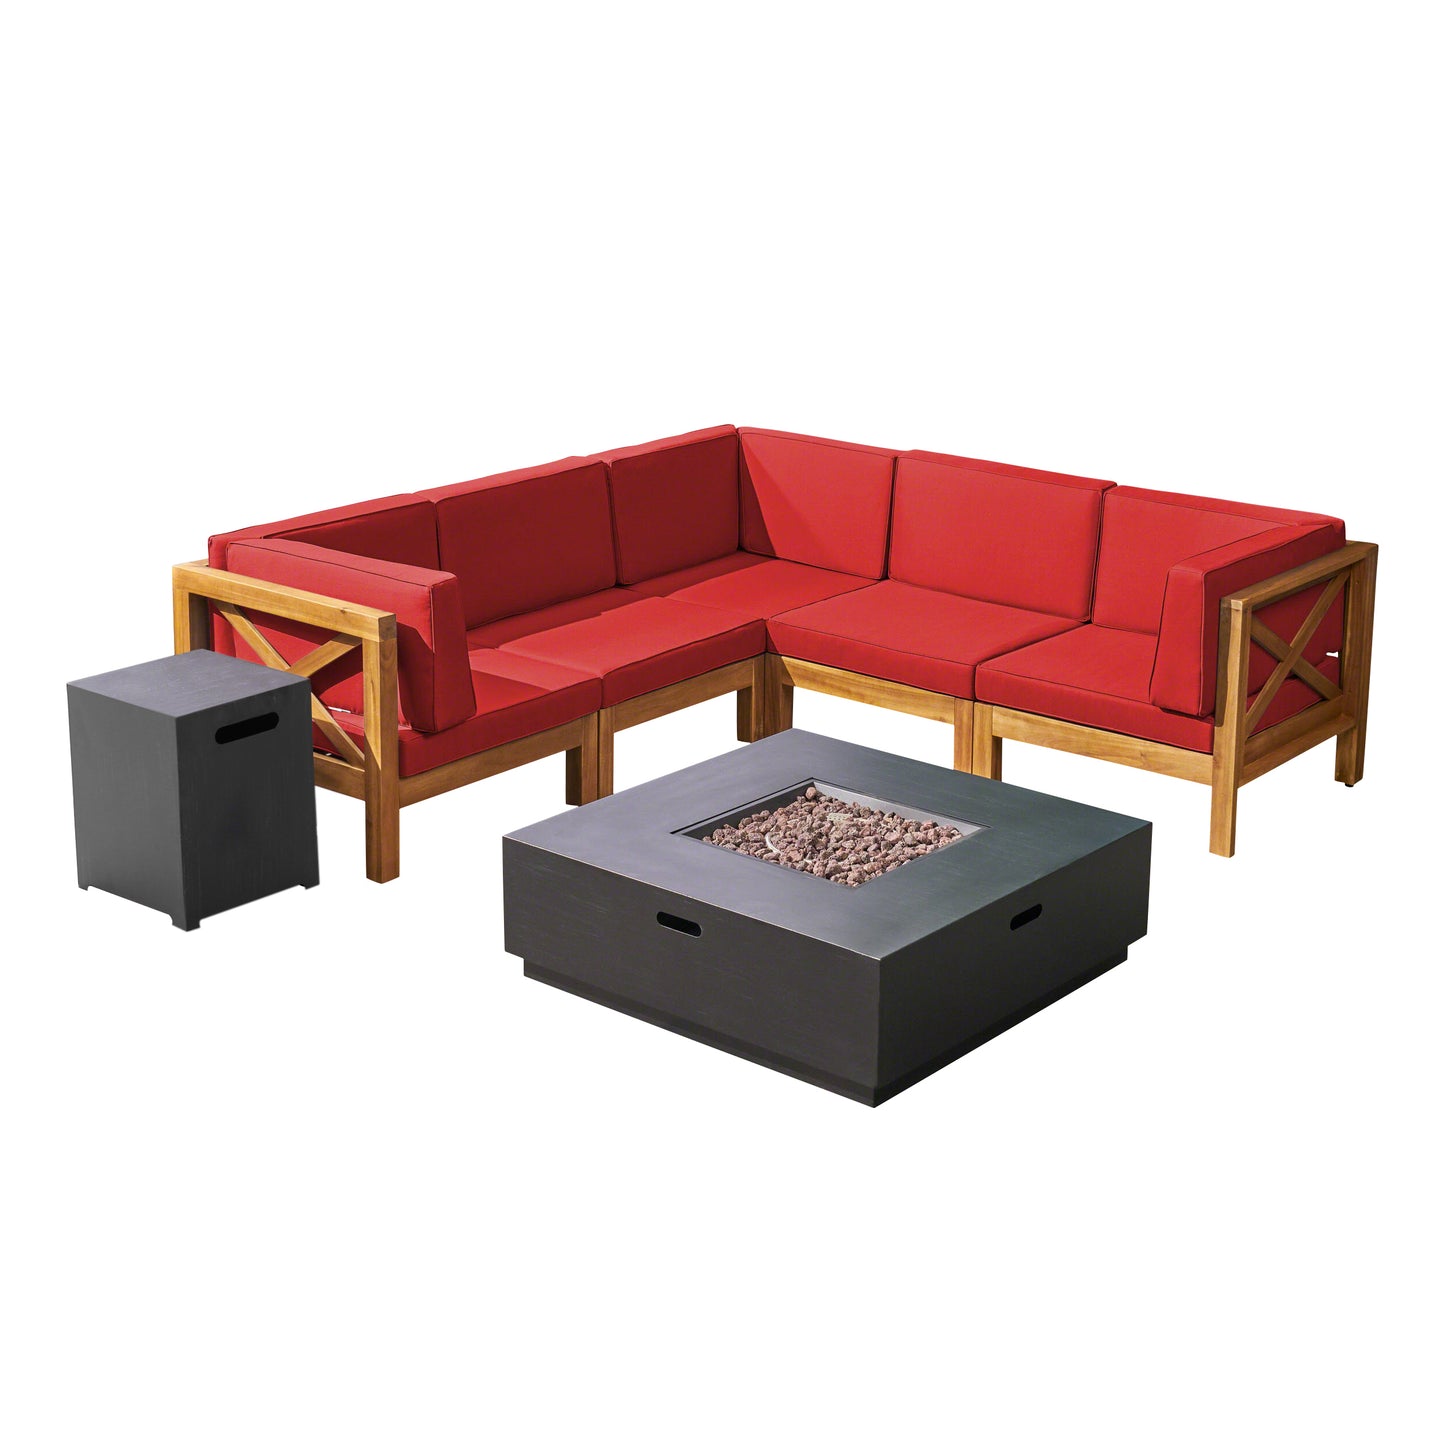 Gina Outdoor Acacia Wood 5 Seater Sectional Sofa Set with Fire Pit